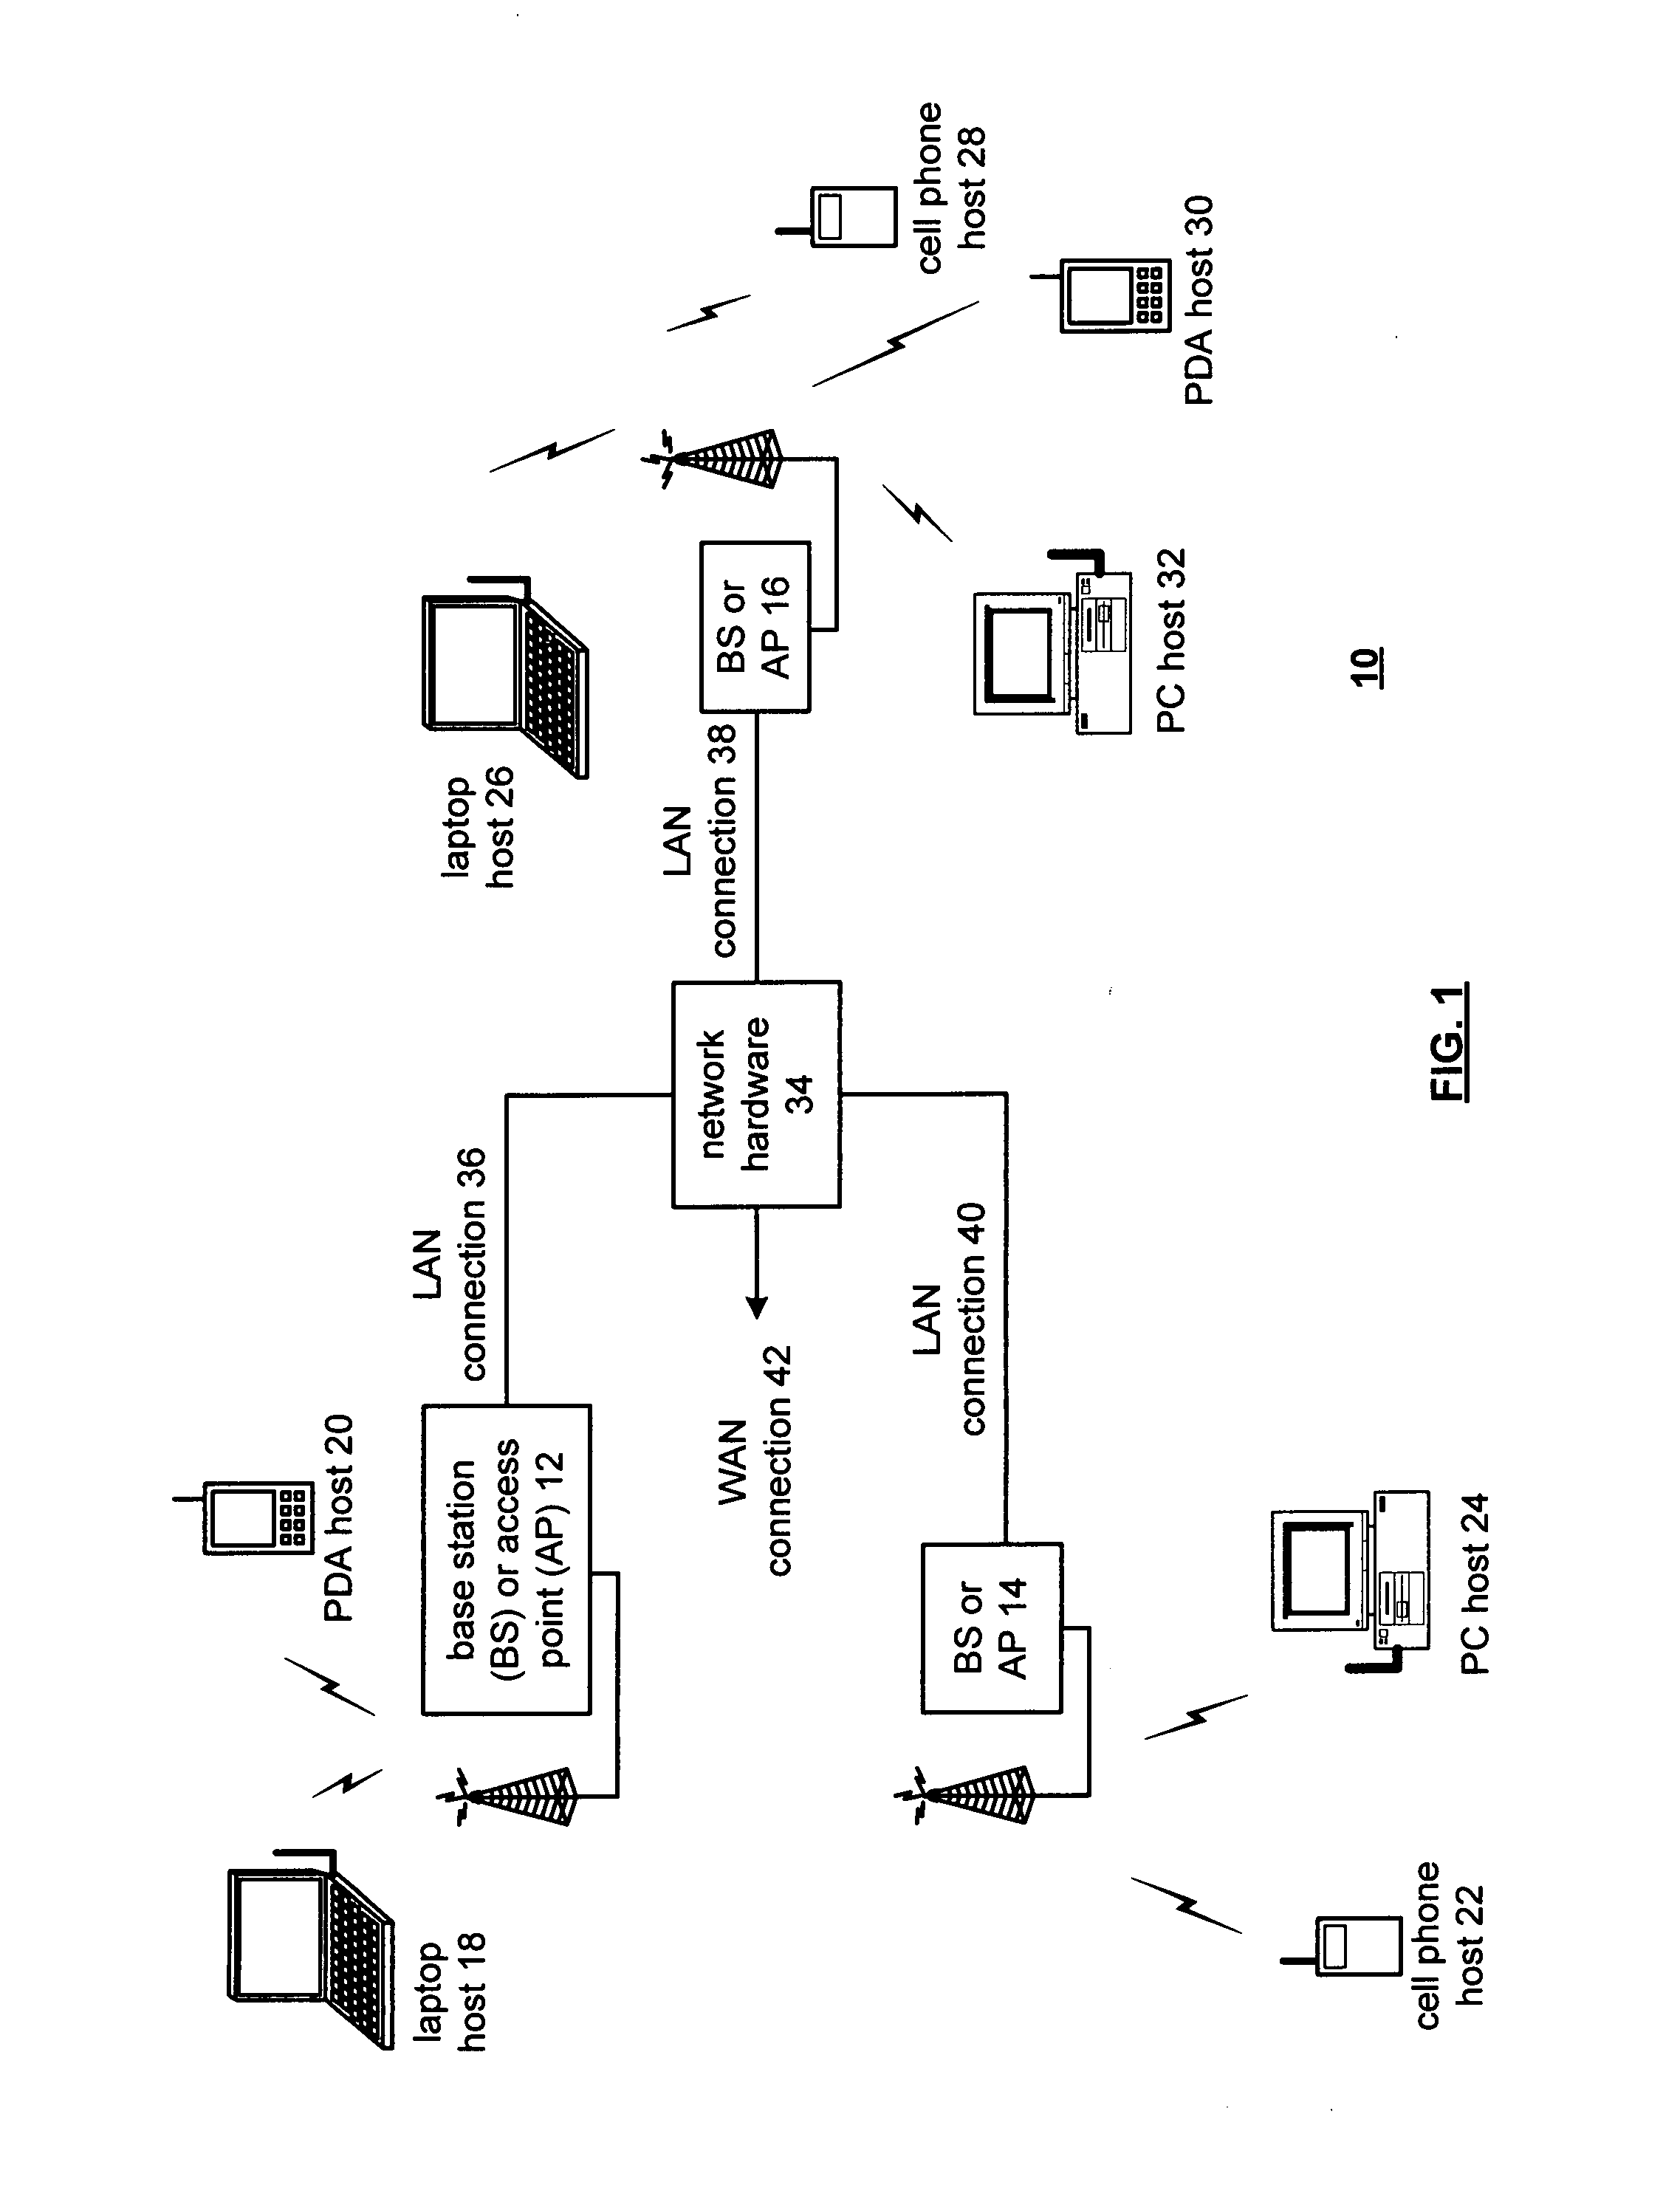 Shared processing between wireless interface devices of a host device